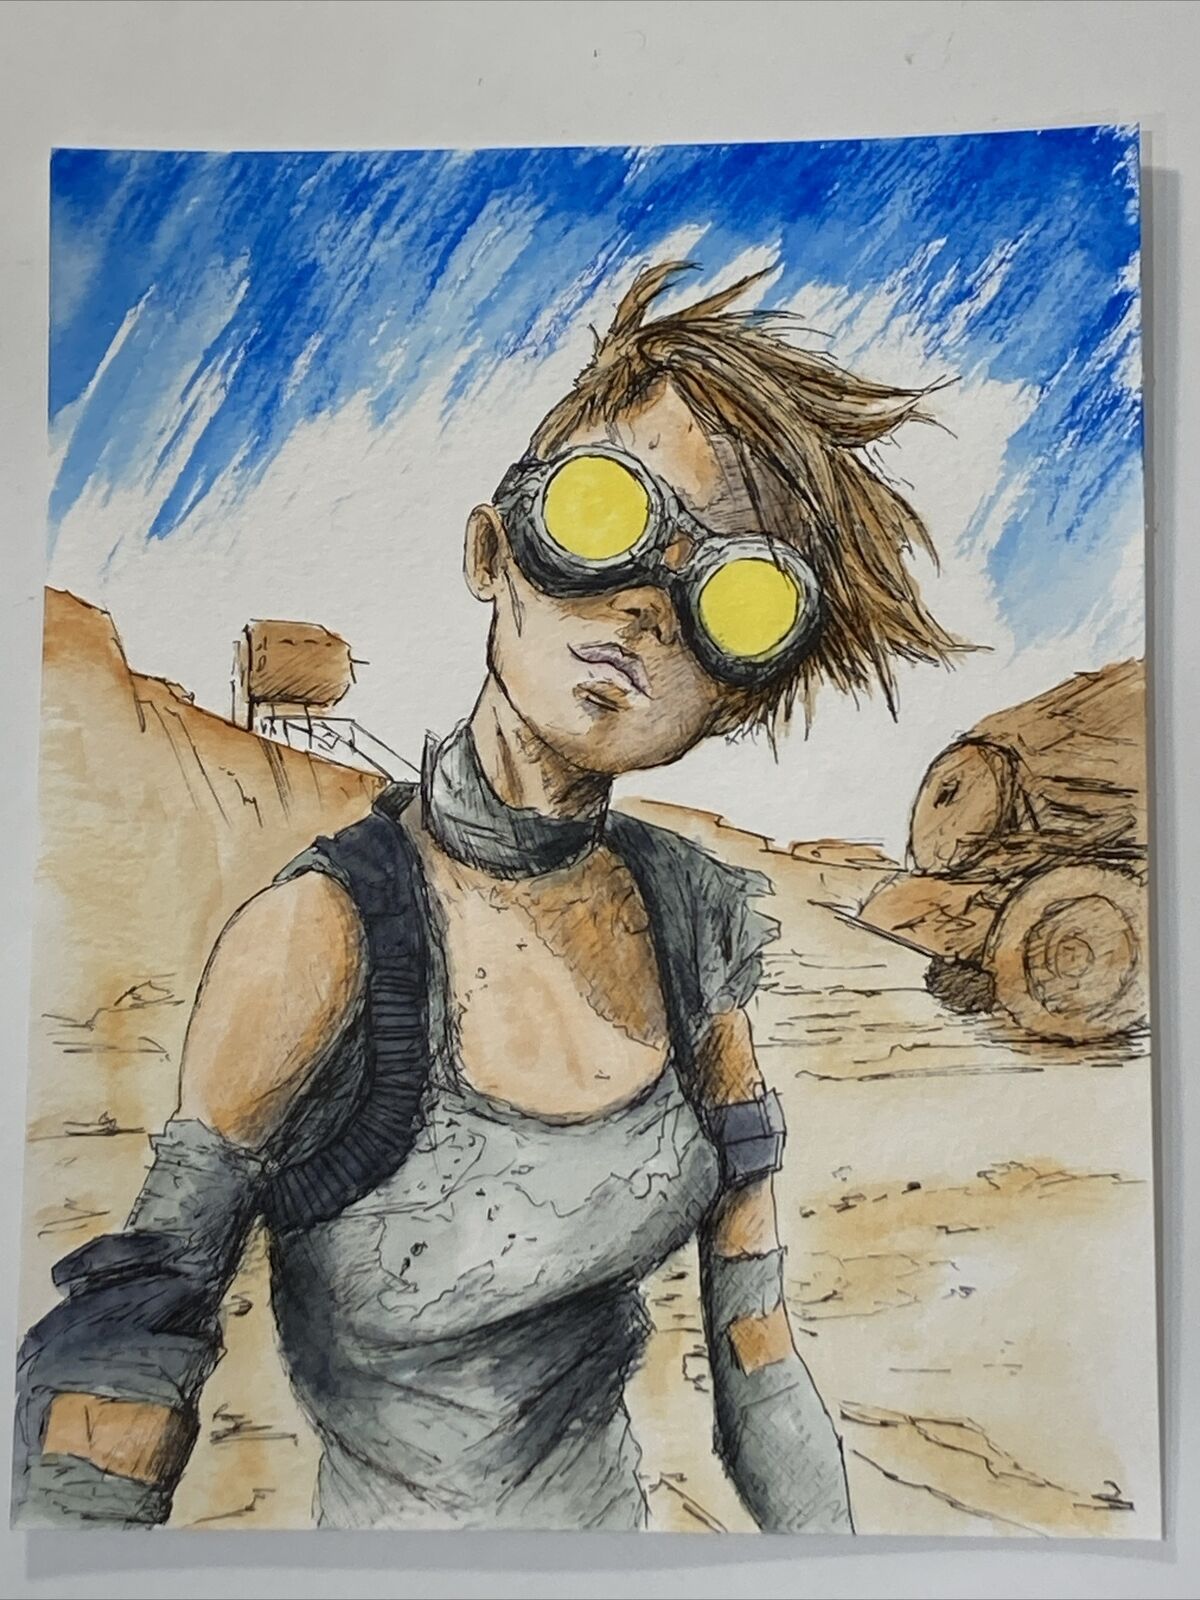 Post Apocalyptic Girl 8x10 Original Watercolor and Ink Painting Comic Book Art